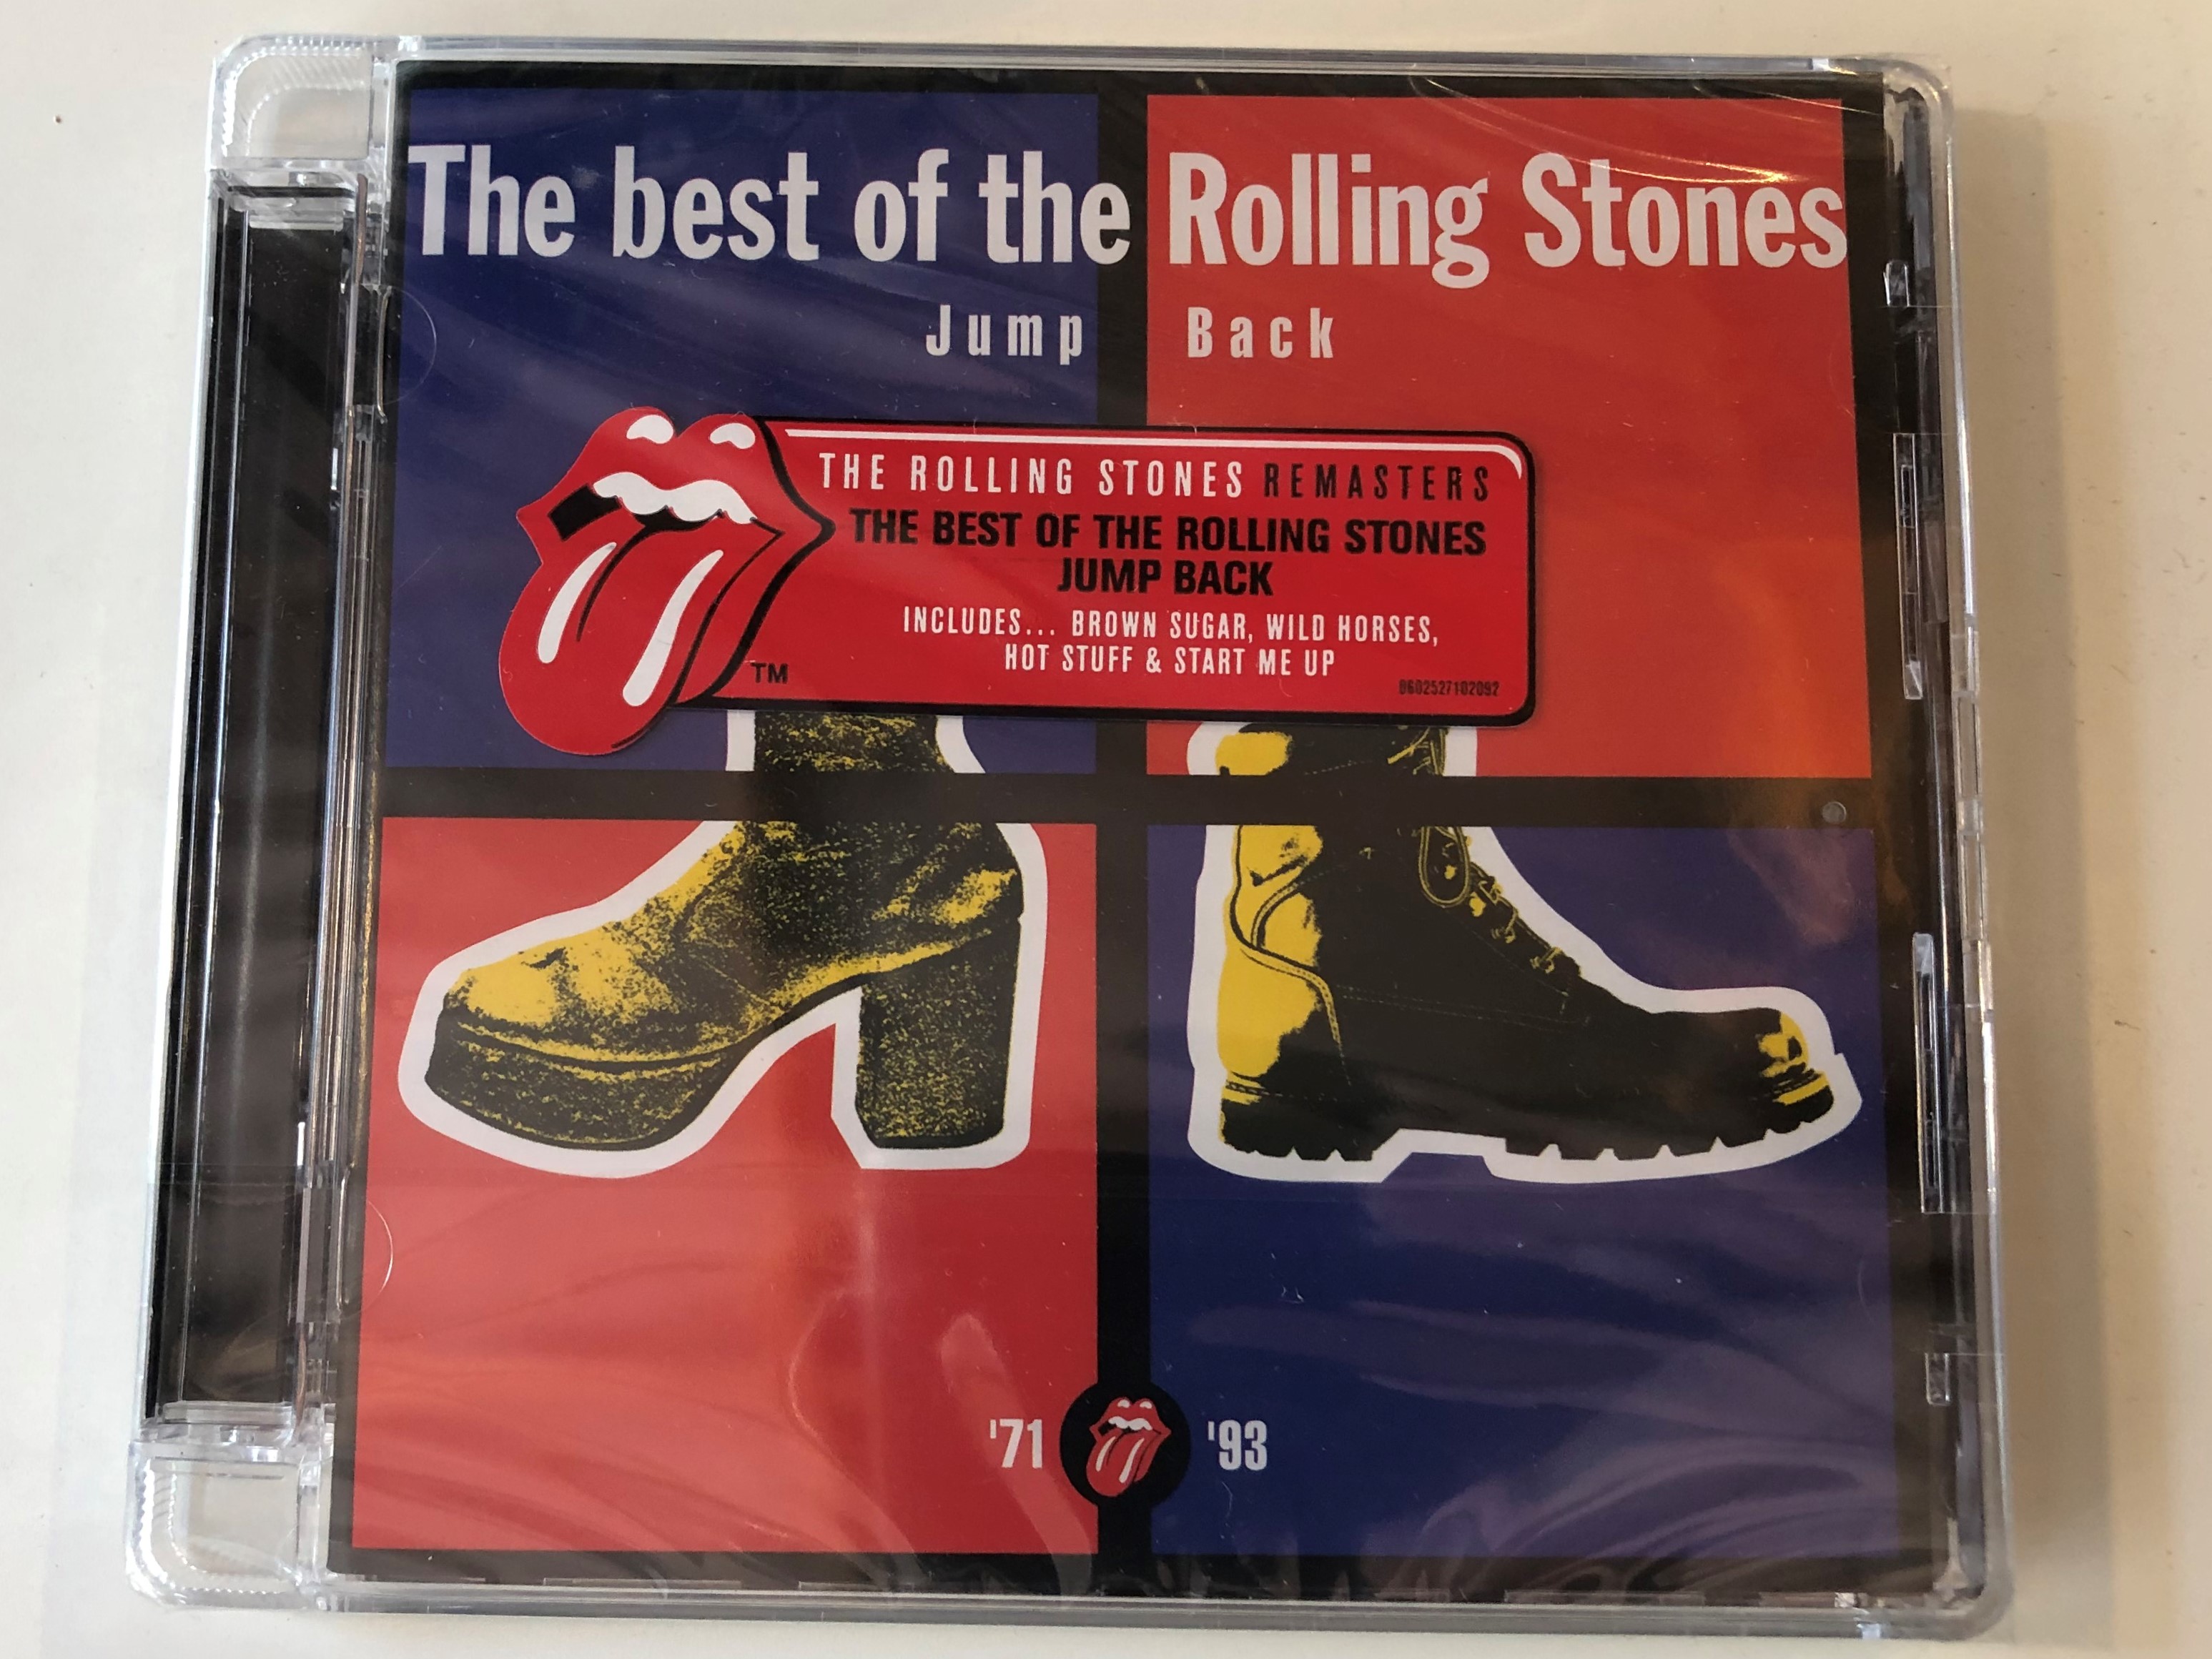 the-best-of-the-rolling-stones-jump-back-71-93-includes...-brown-sugar-wild-horses-hot-stuff-start-me-up-polydor-audio-cd-2009-0602527102092-1-.jpg